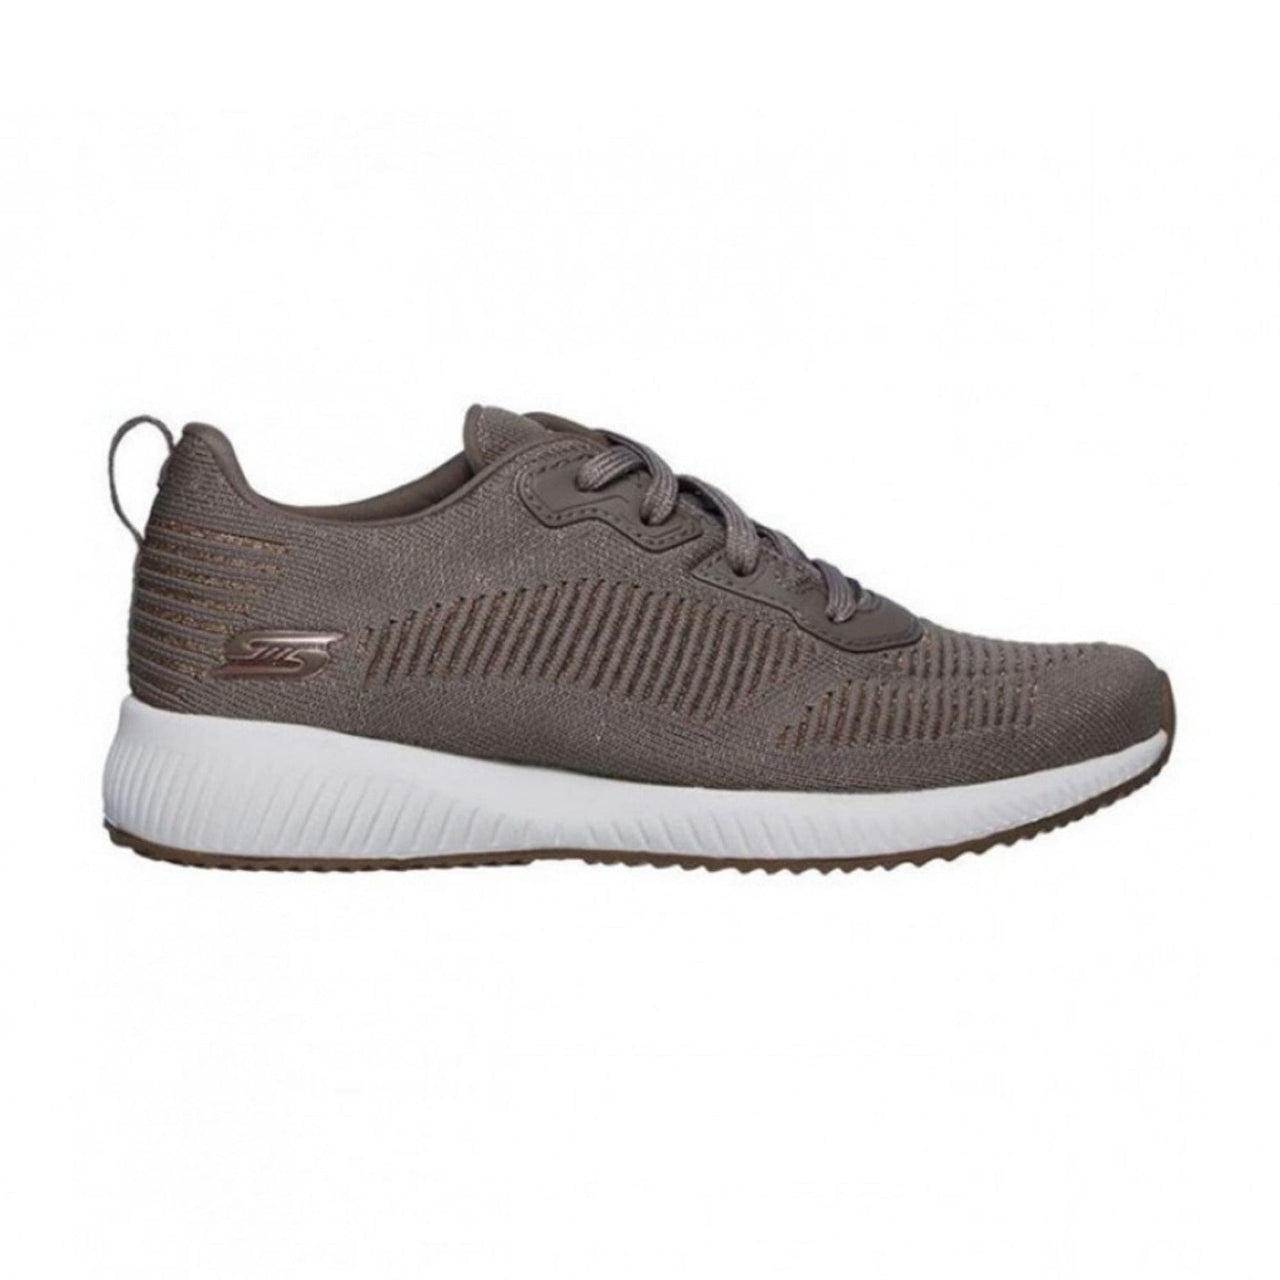 Skechers Mujer Bobs Glam League Taupe Comprar Online en Much Sneakers®